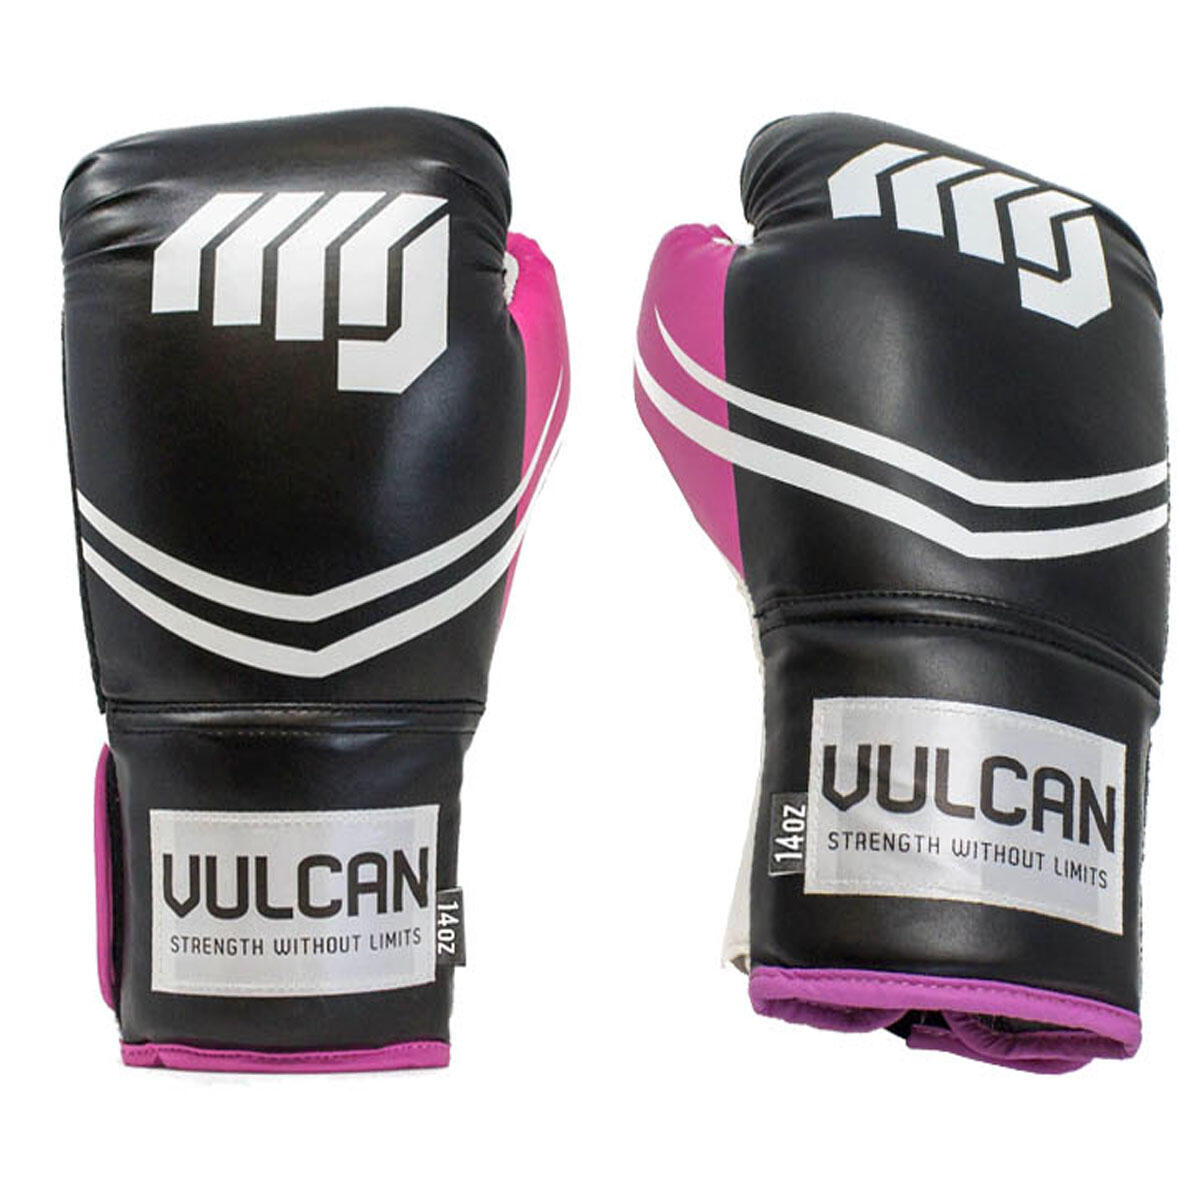 VULCAN BOXING GLOVES 14oz PINK/BLACK WITH HANDWRAPS 4/7